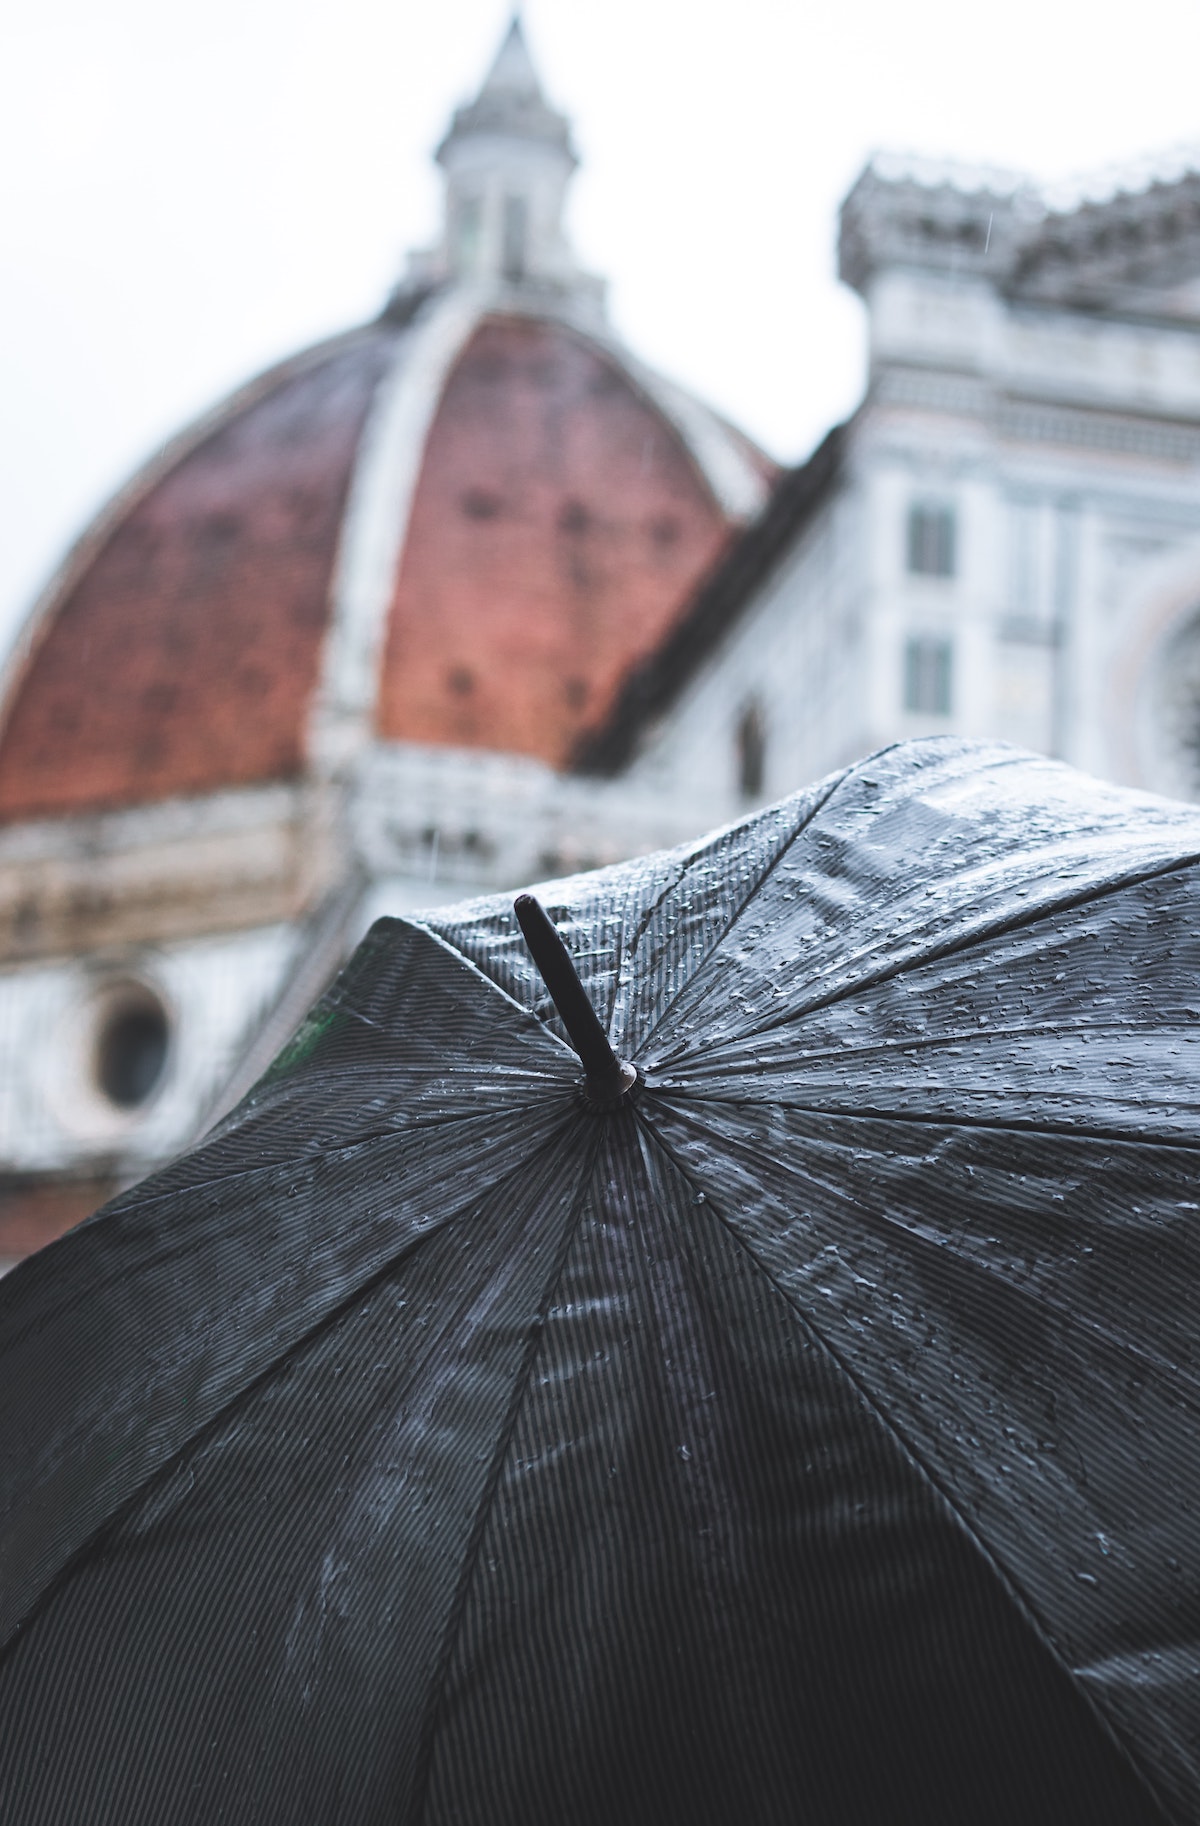 View of Florence, Italy's cathedral dome as seen from above a black umbrella on a rainy day